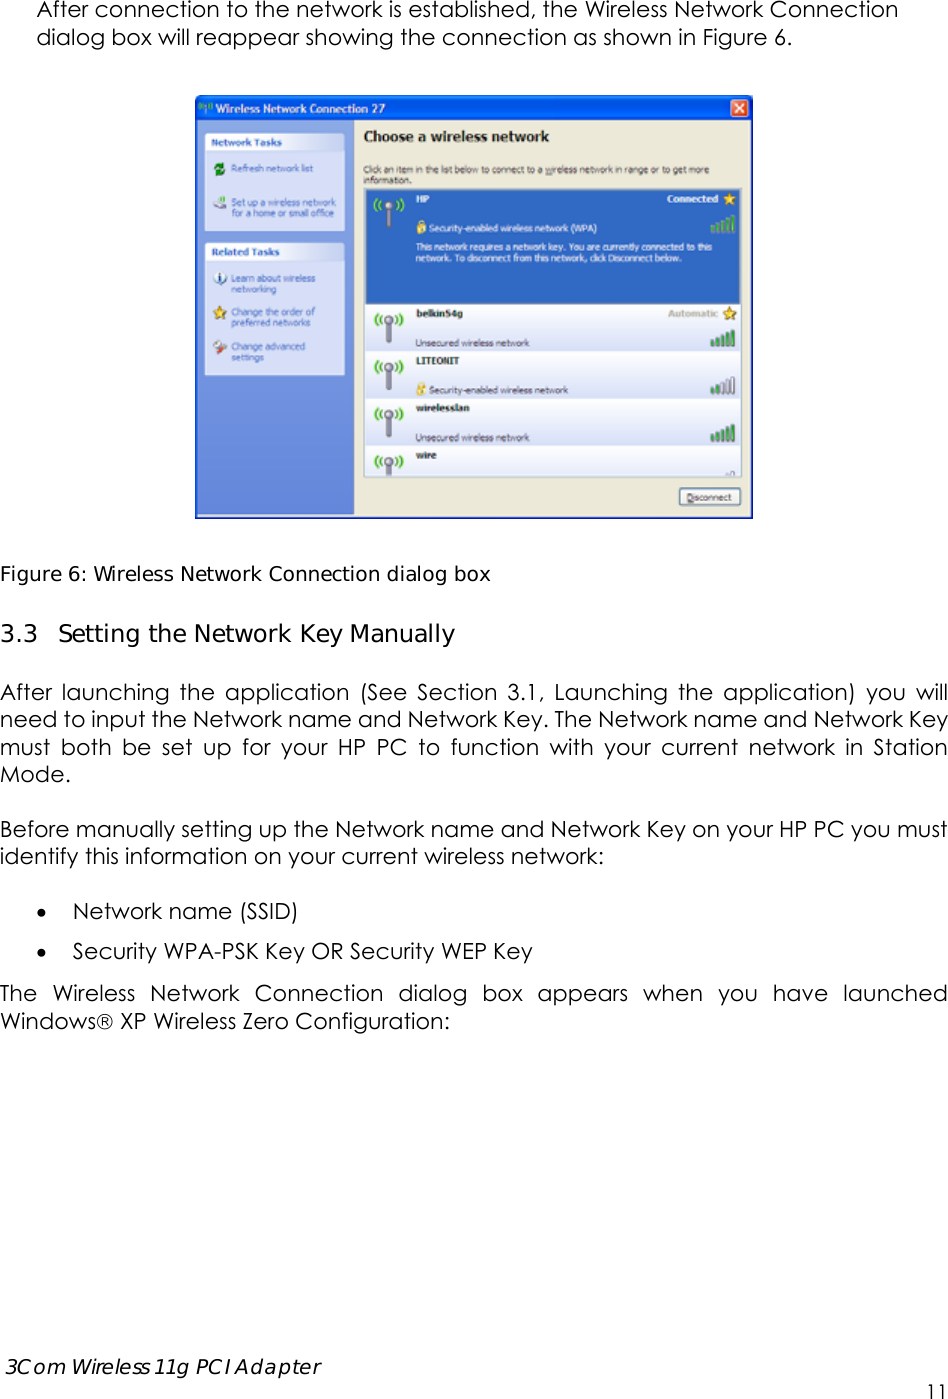      3Com Wireless 11g PCI Adapter     11 After connection to the network is established, the Wireless Network Connection dialog box will reappear showing the connection as shown in Figure 6.      Figure 6: Wireless Network Connection dialog box 3.3 Setting the Network Key Manually  After launching the application (See Section 3.1, Launching the application) you will need to input the Network name and Network Key. The Network name and Network Key must both be set up for your HP PC to function with your current network in Station Mode.  Before manually setting up the Network name and Network Key on your HP PC you must identify this information on your current wireless network:   Network name (SSID)  Security WPA-PSK Key OR Security WEP Key  The Wireless Network Connection dialog box appears when you have launched Windows XP Wireless Zero Configuration:  